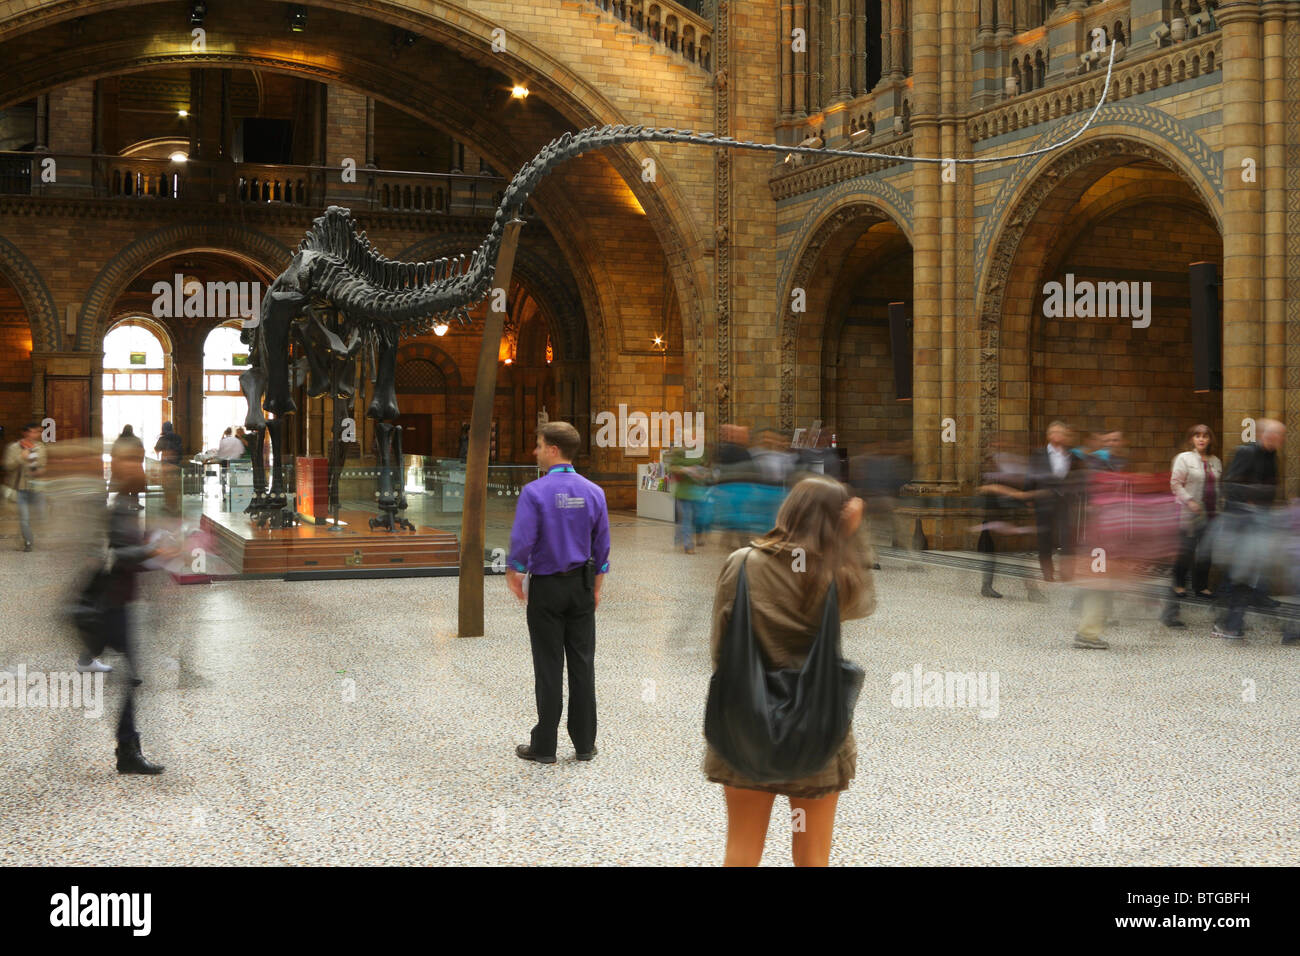 Museum attendant looks on at dinosaur in the main hall of the Natural History Museum as people pass Stock Photo